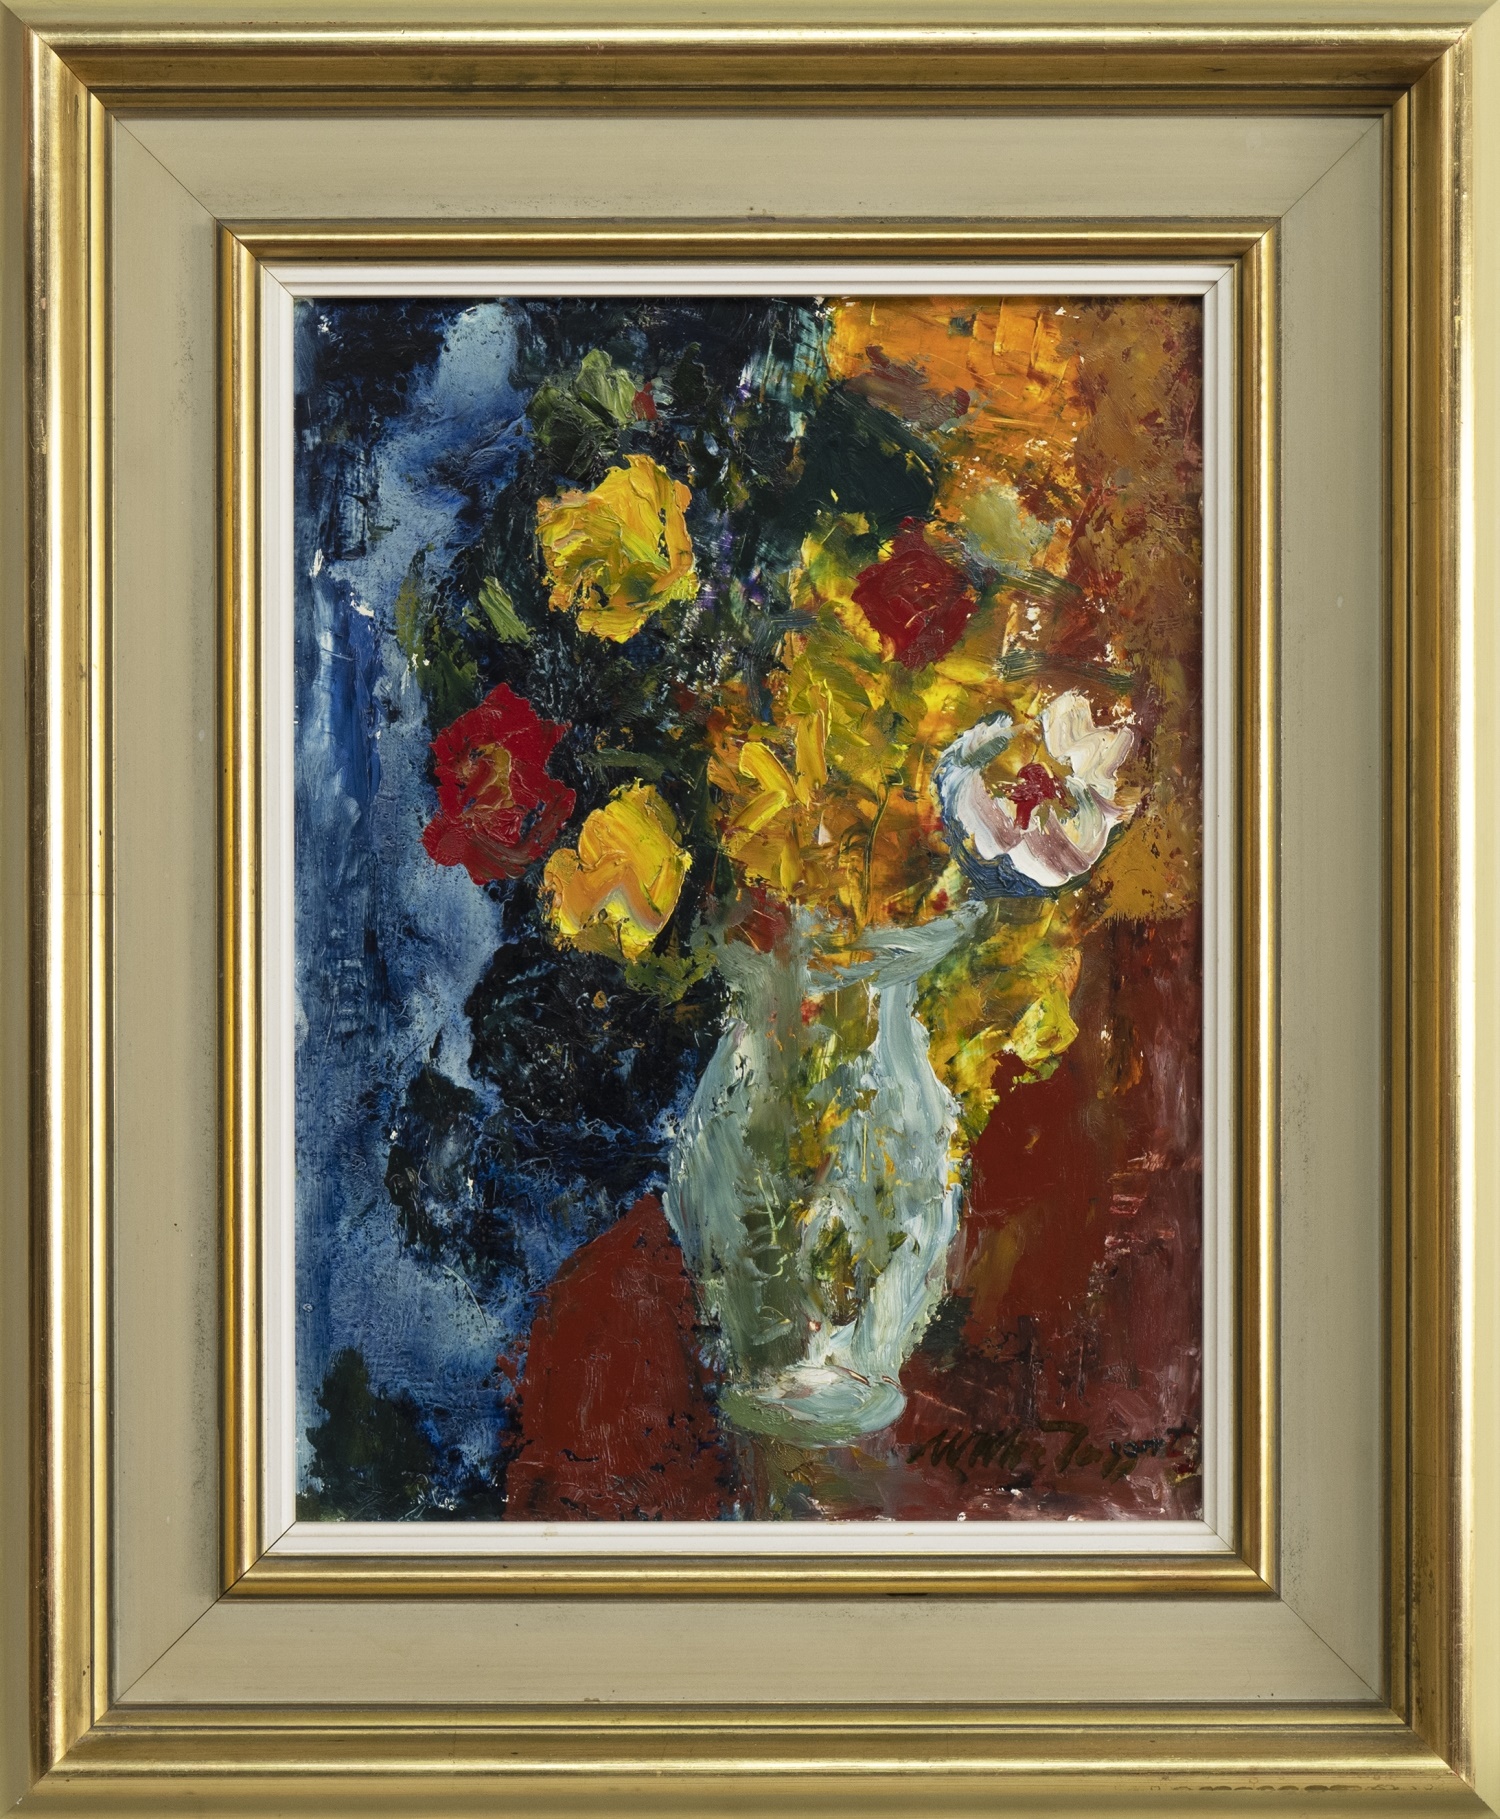 SOME FLOWERS, AN OIL BY SIR WILLIAM MACTAGGART